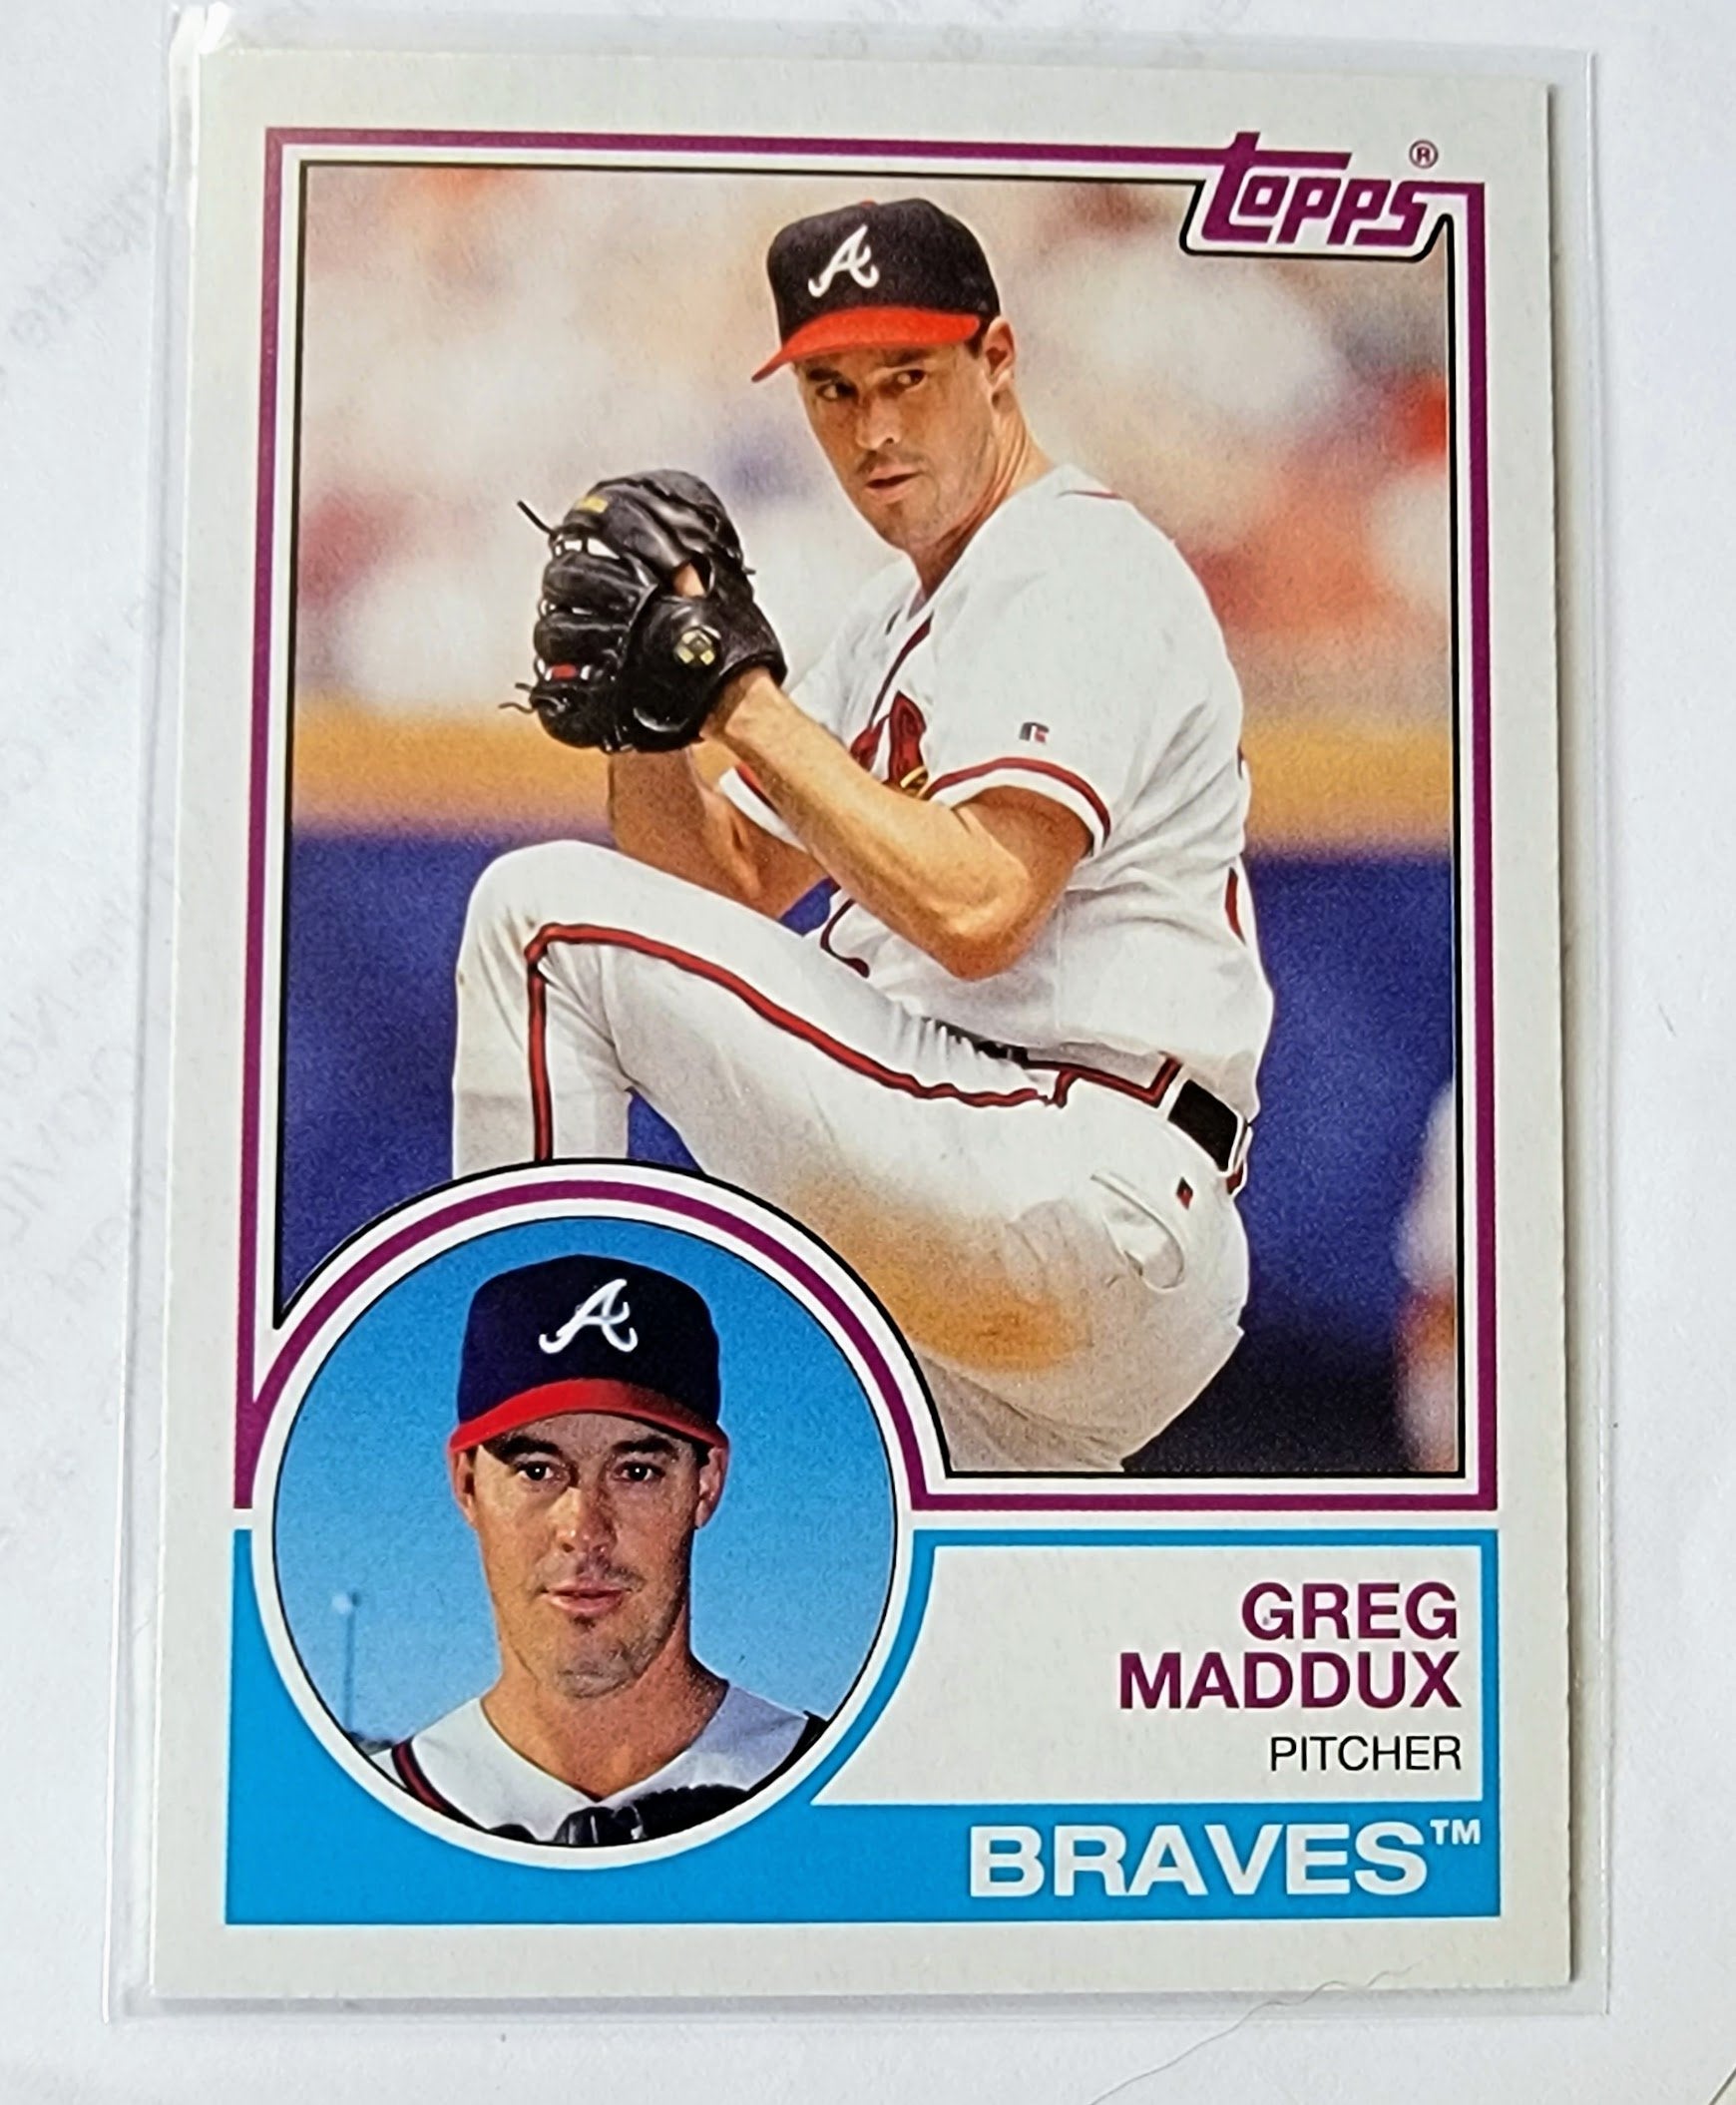 2021 Topps Archives Greg Maddux 1983 Baseball Trading Card MCSC1 simple Xclusive Collectibles   